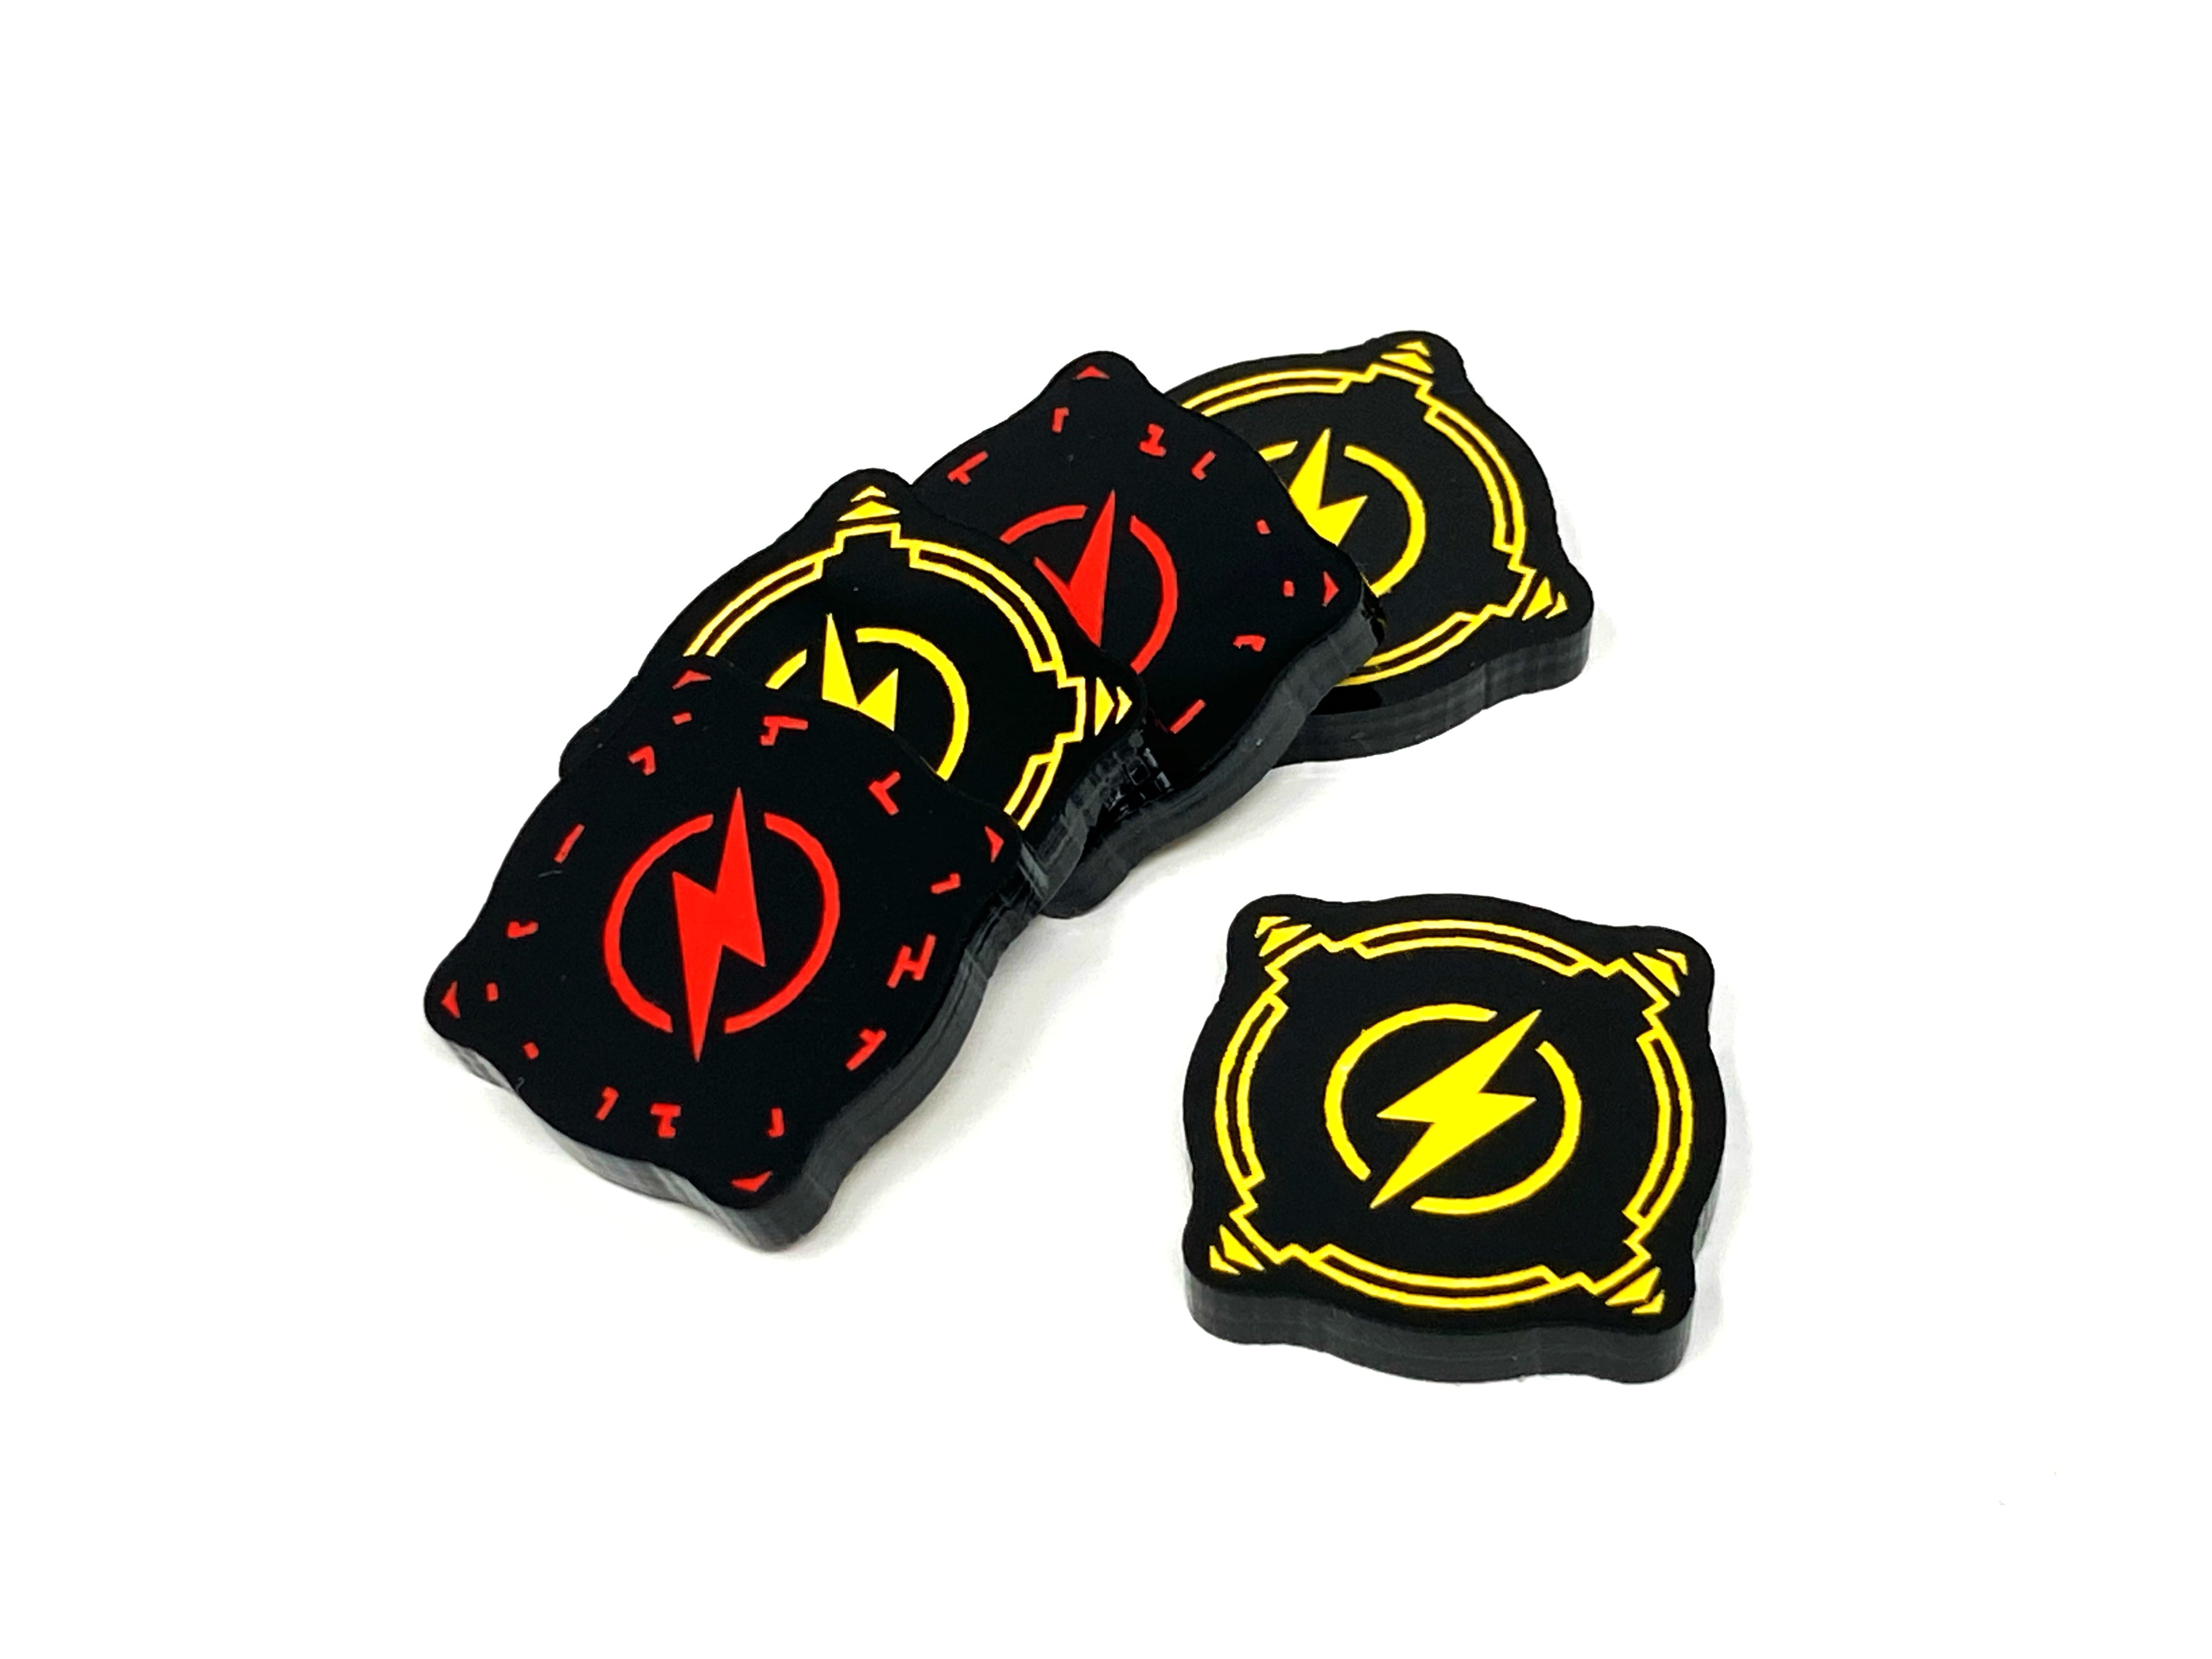 5 x Charge Tokens - Black Series (Double Sided)